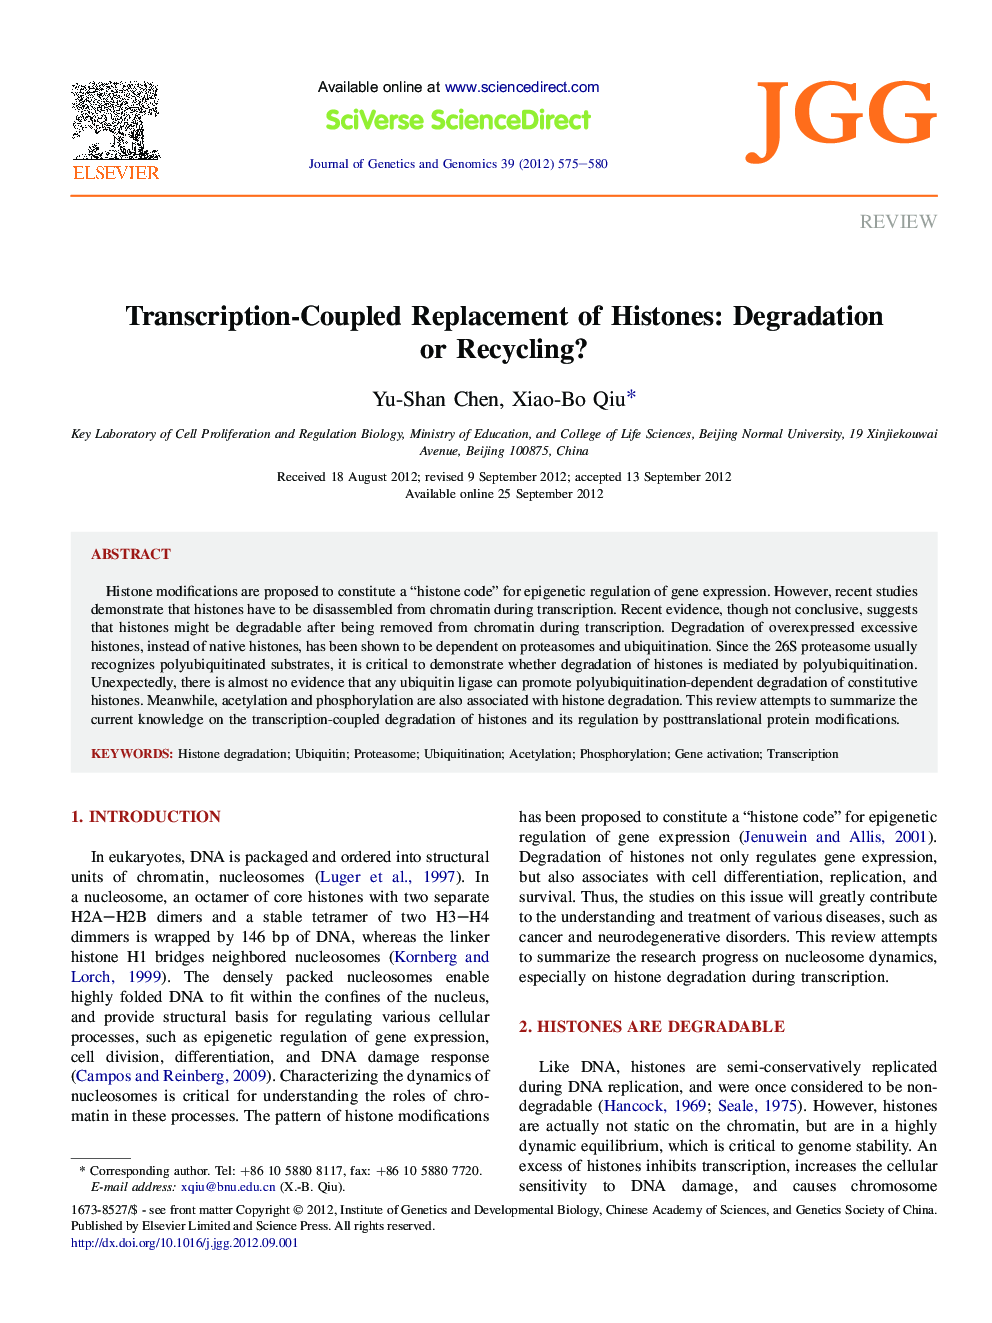 Transcription-Coupled Replacement of Histones: Degradation or Recycling?